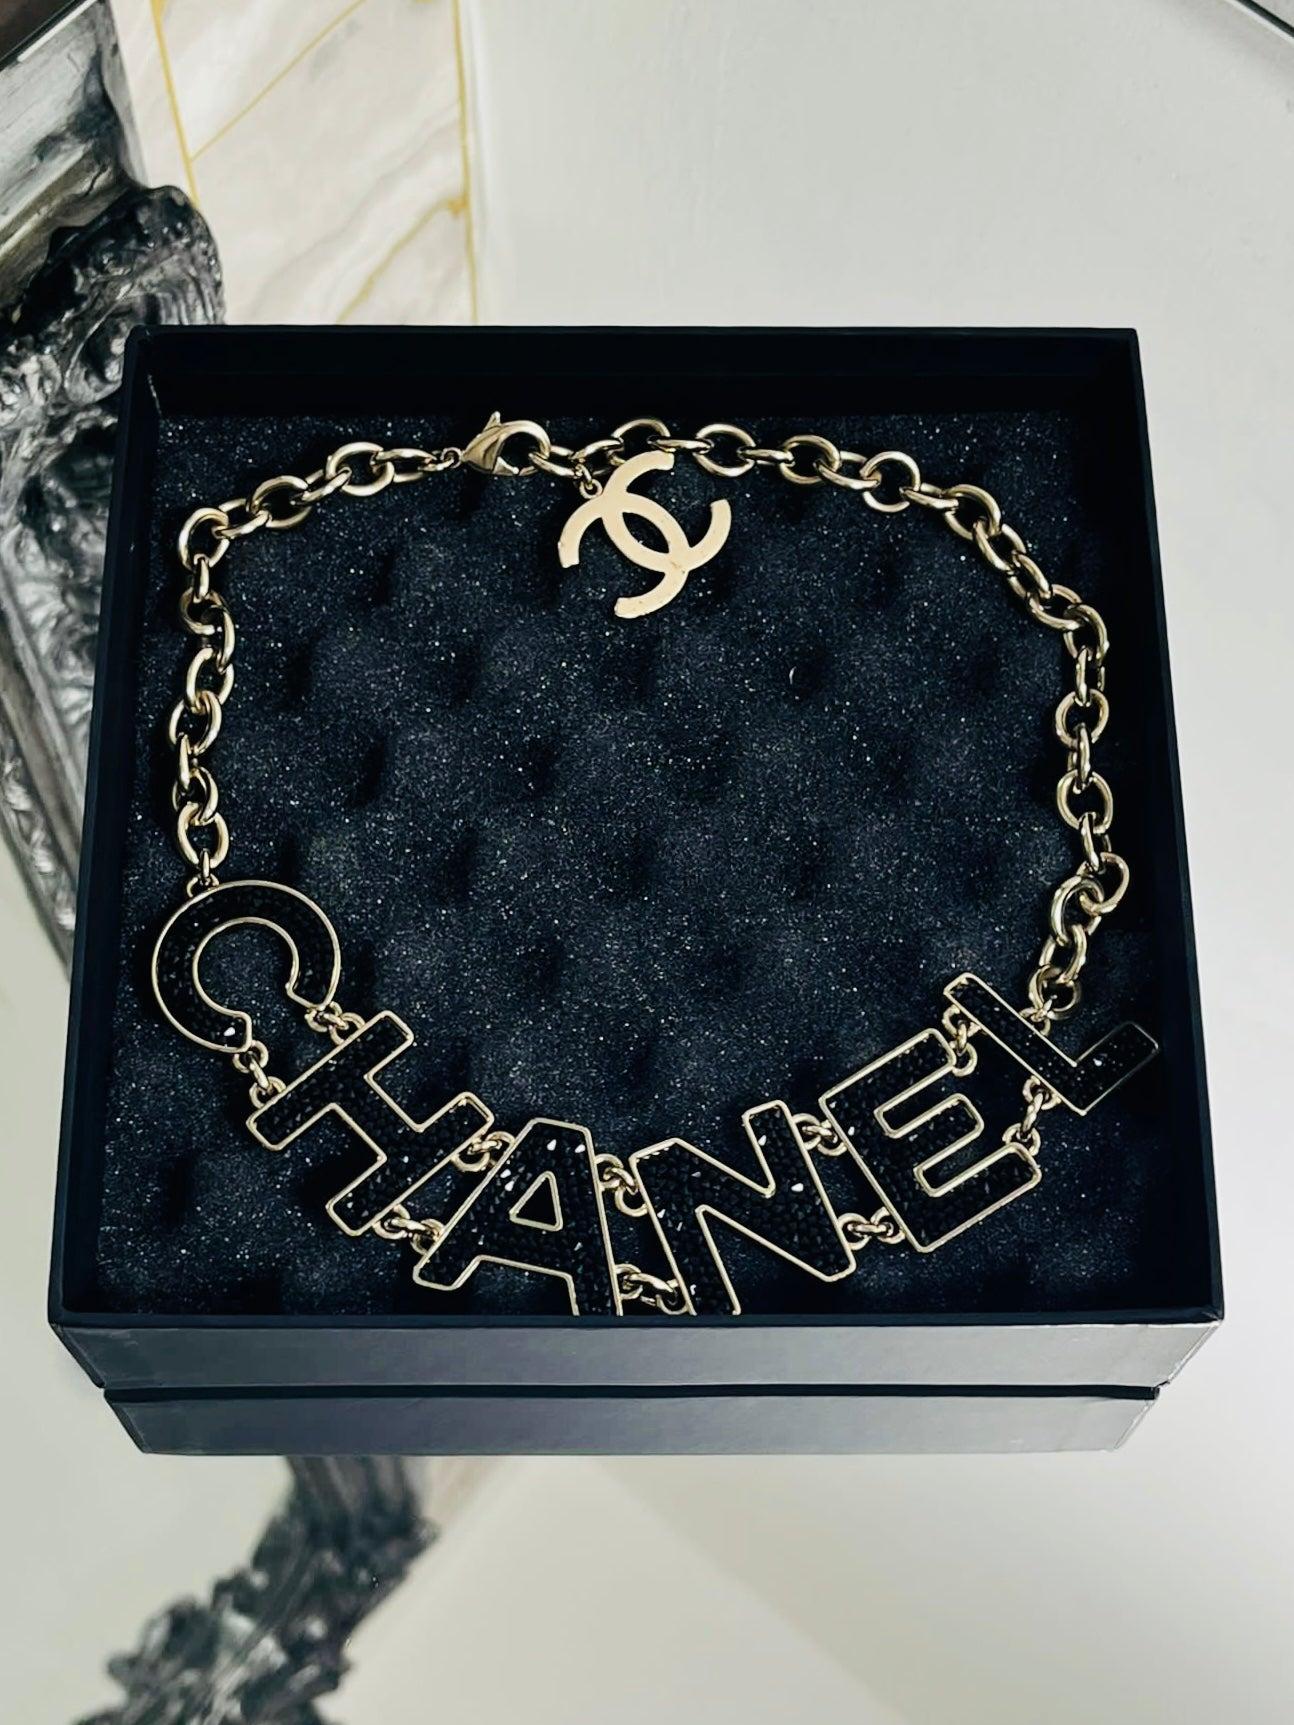 Chanel Strauss/Crystal Logo Choker Necklace

Black crystals in champagne gold hardware. Lobster closure and dangle 'cc' logo.  

Additional information:
Size- One Size
Composition- Crystal/Strauss, Metal
Condition - Very Good (Light marks to dangle